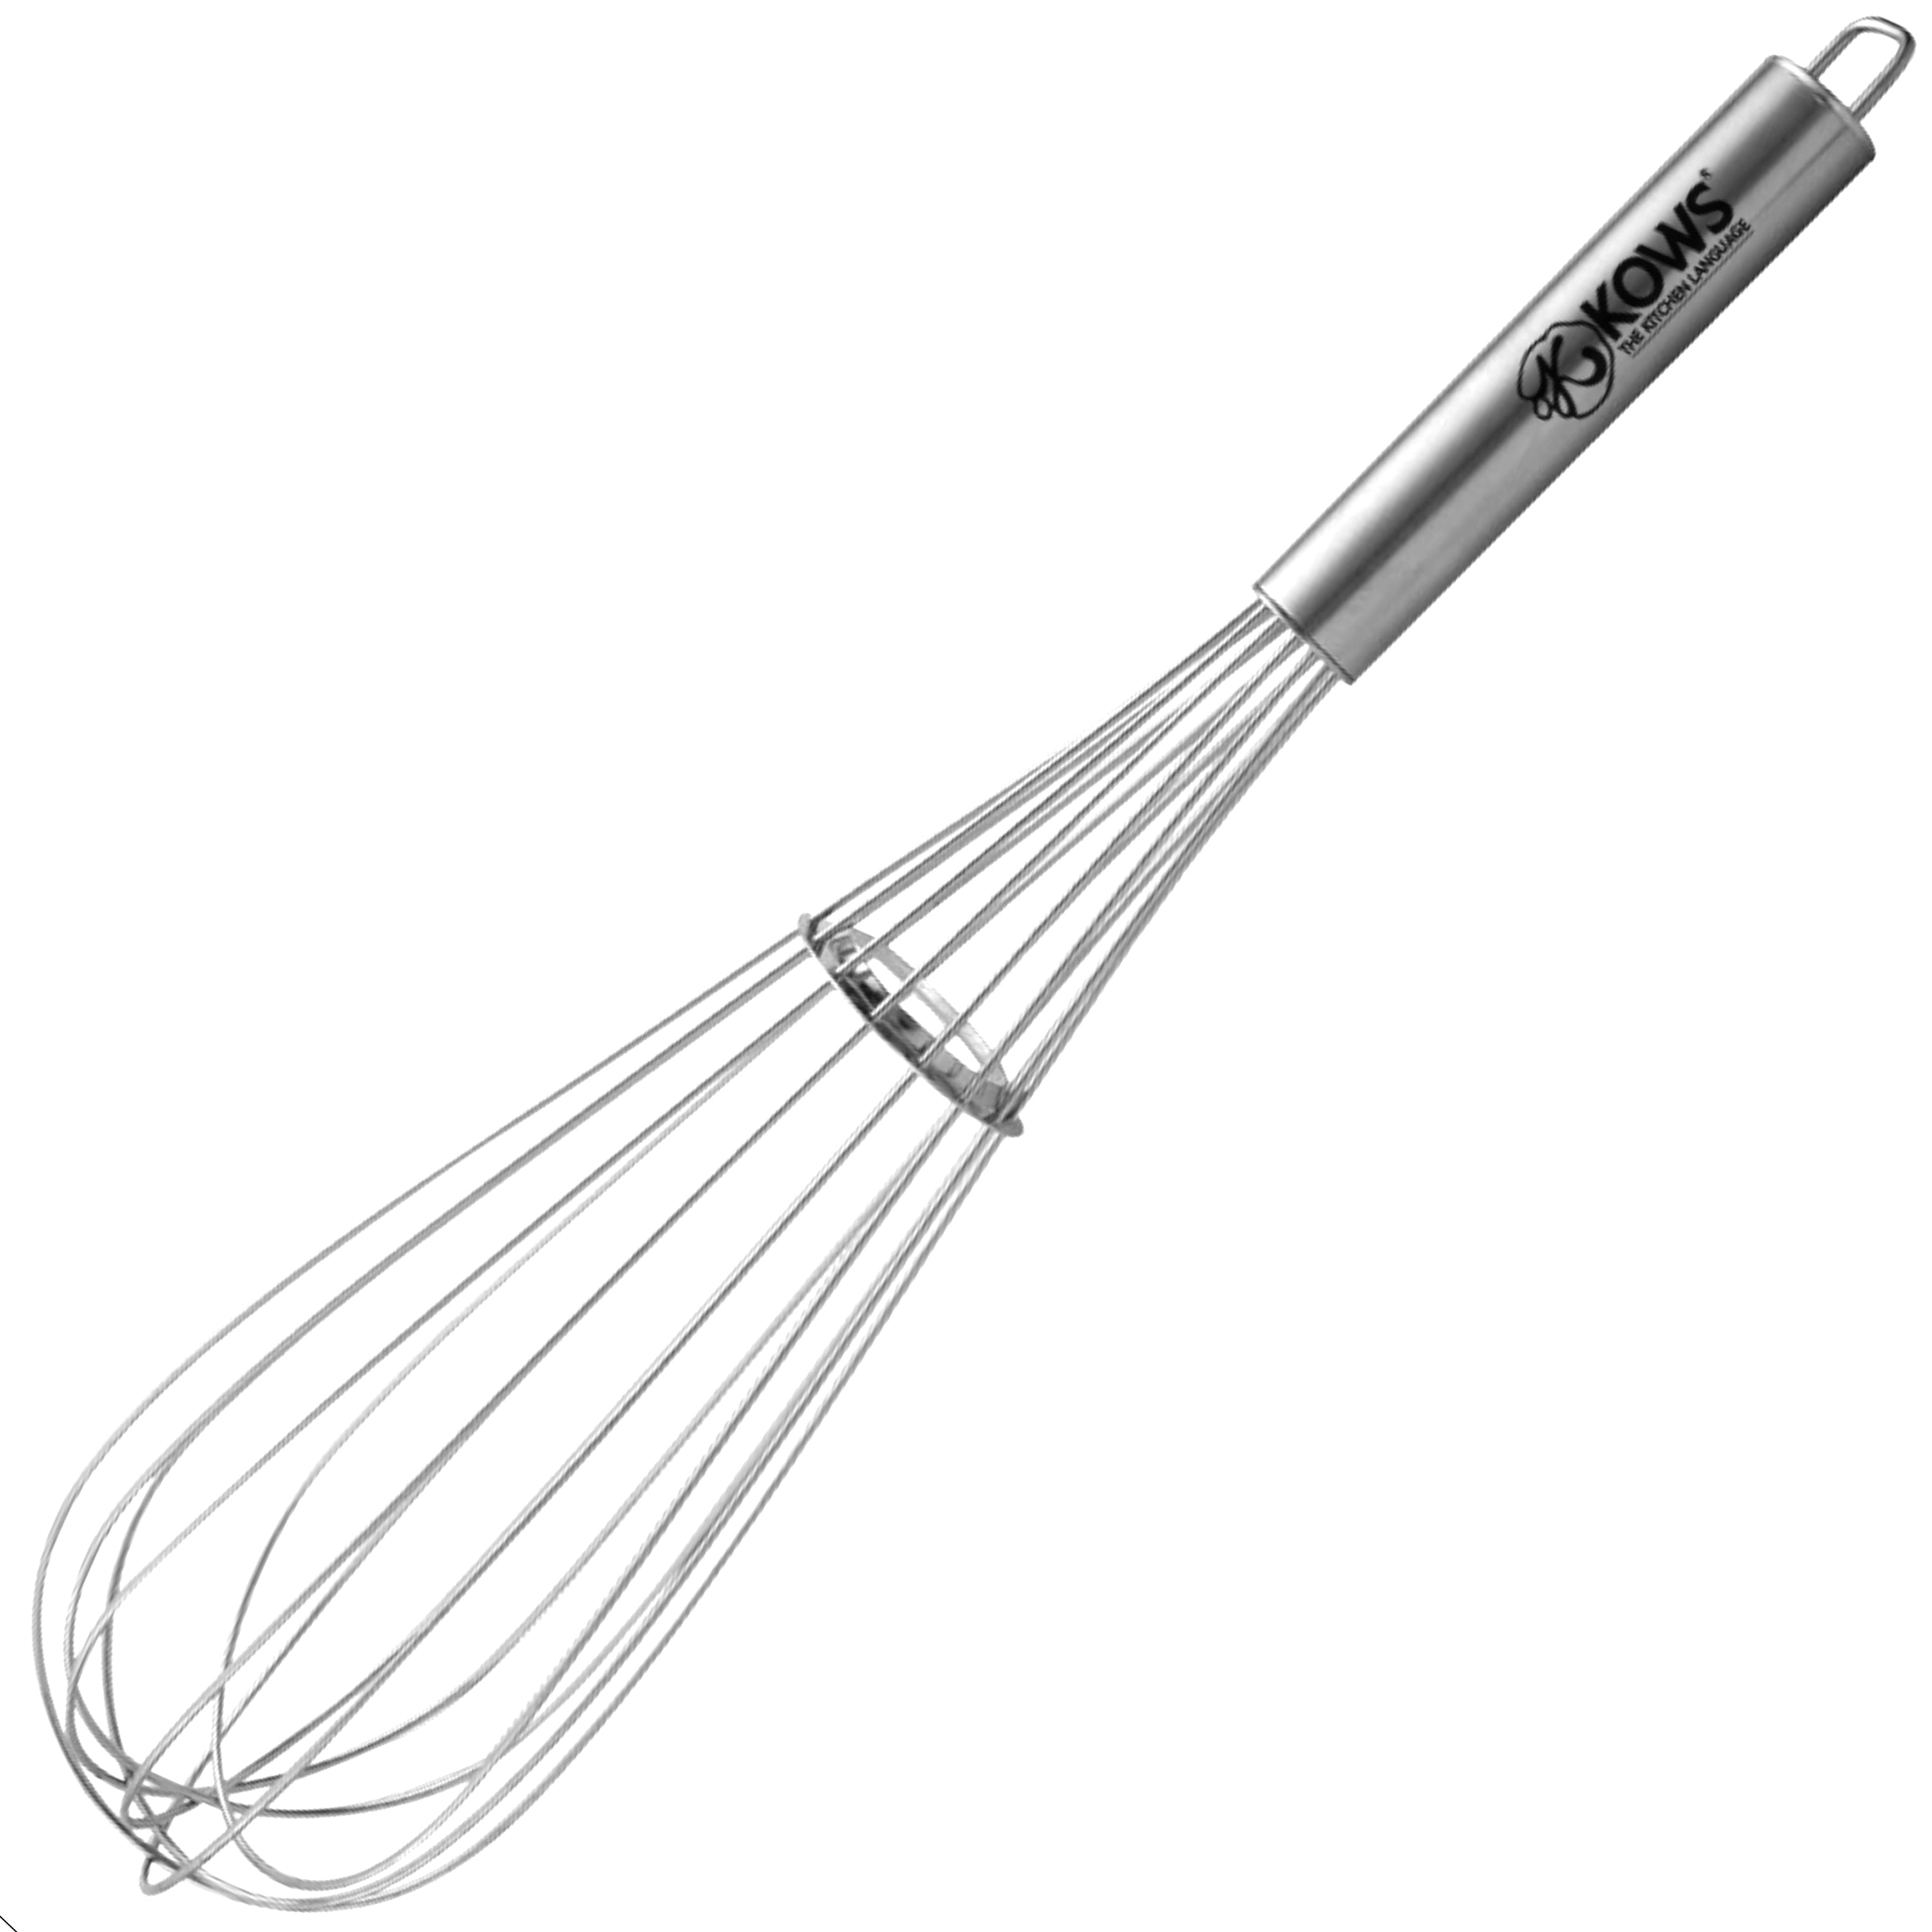 KOWS Pipe handle 2.5mm whisk 35 cm (WK0026)